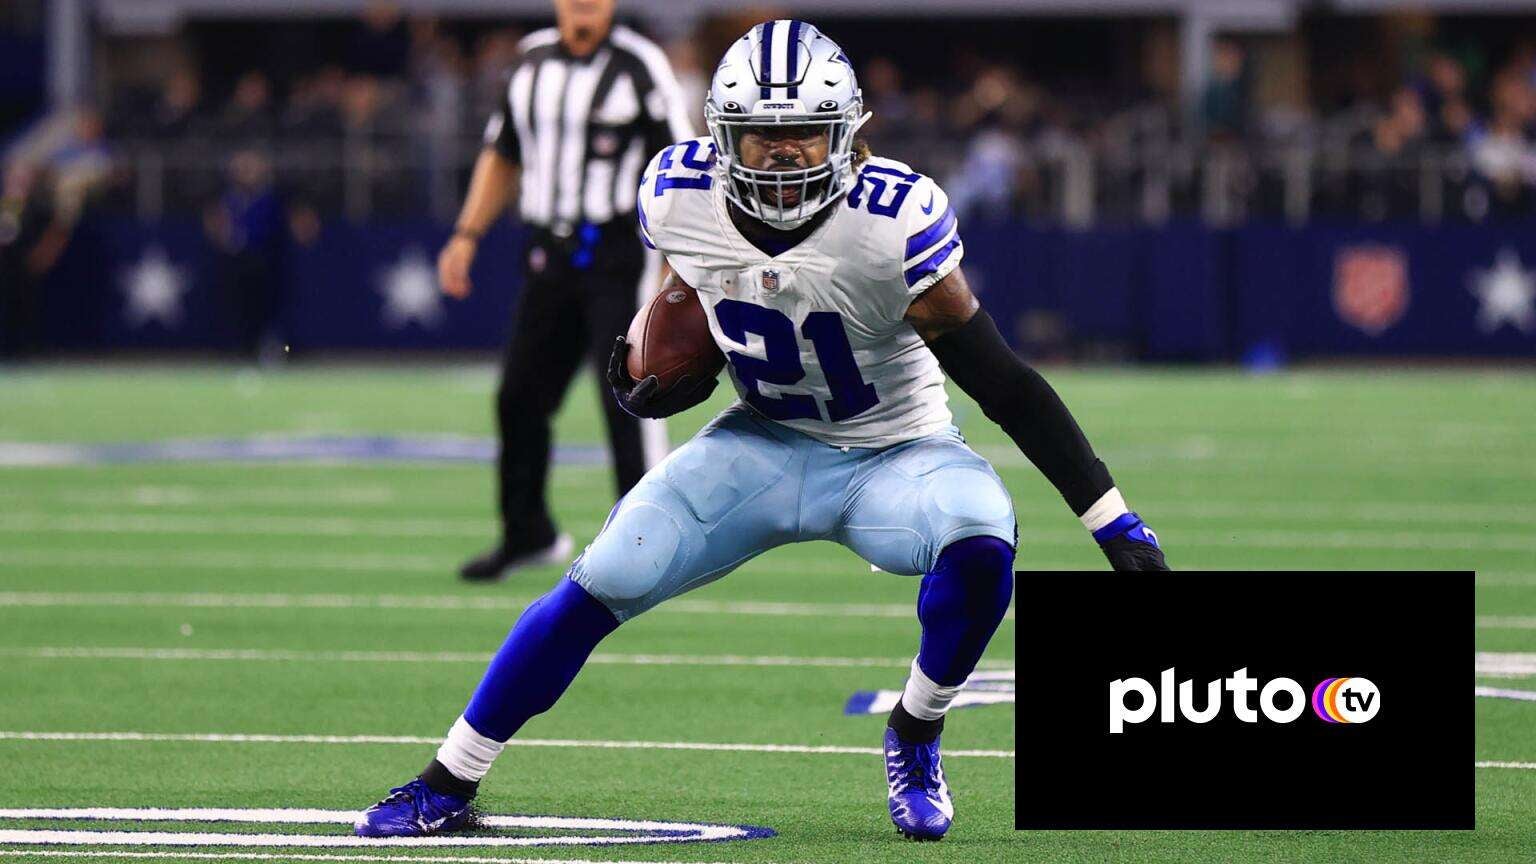 Can You Watch NFL Playoff Games on Pluto TV?